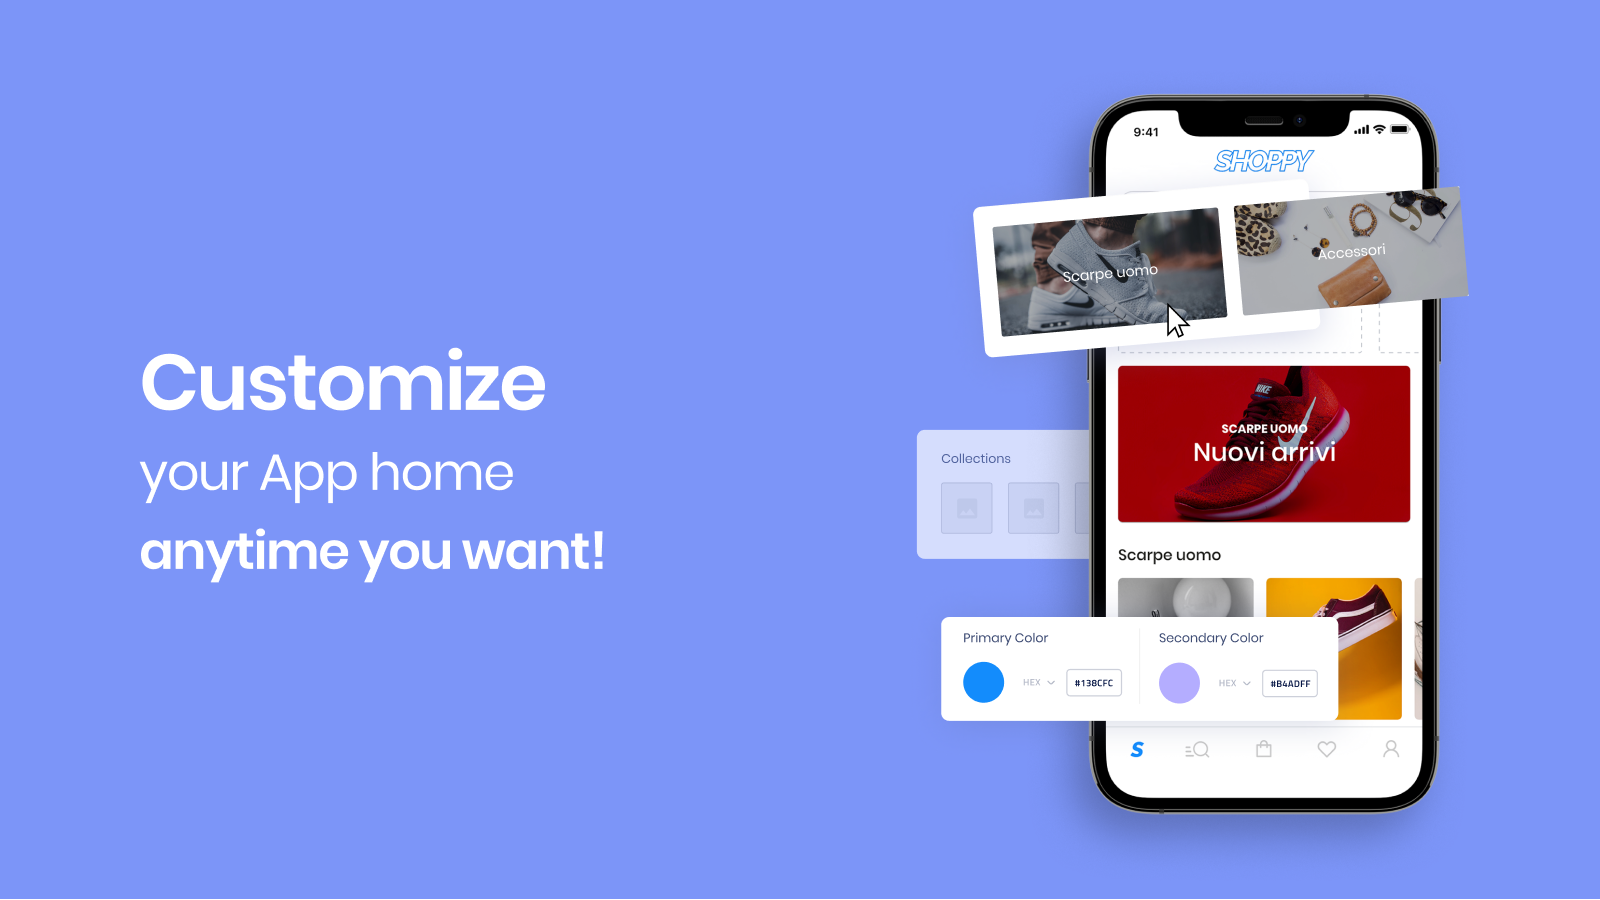 Customize your App home anytime you want!